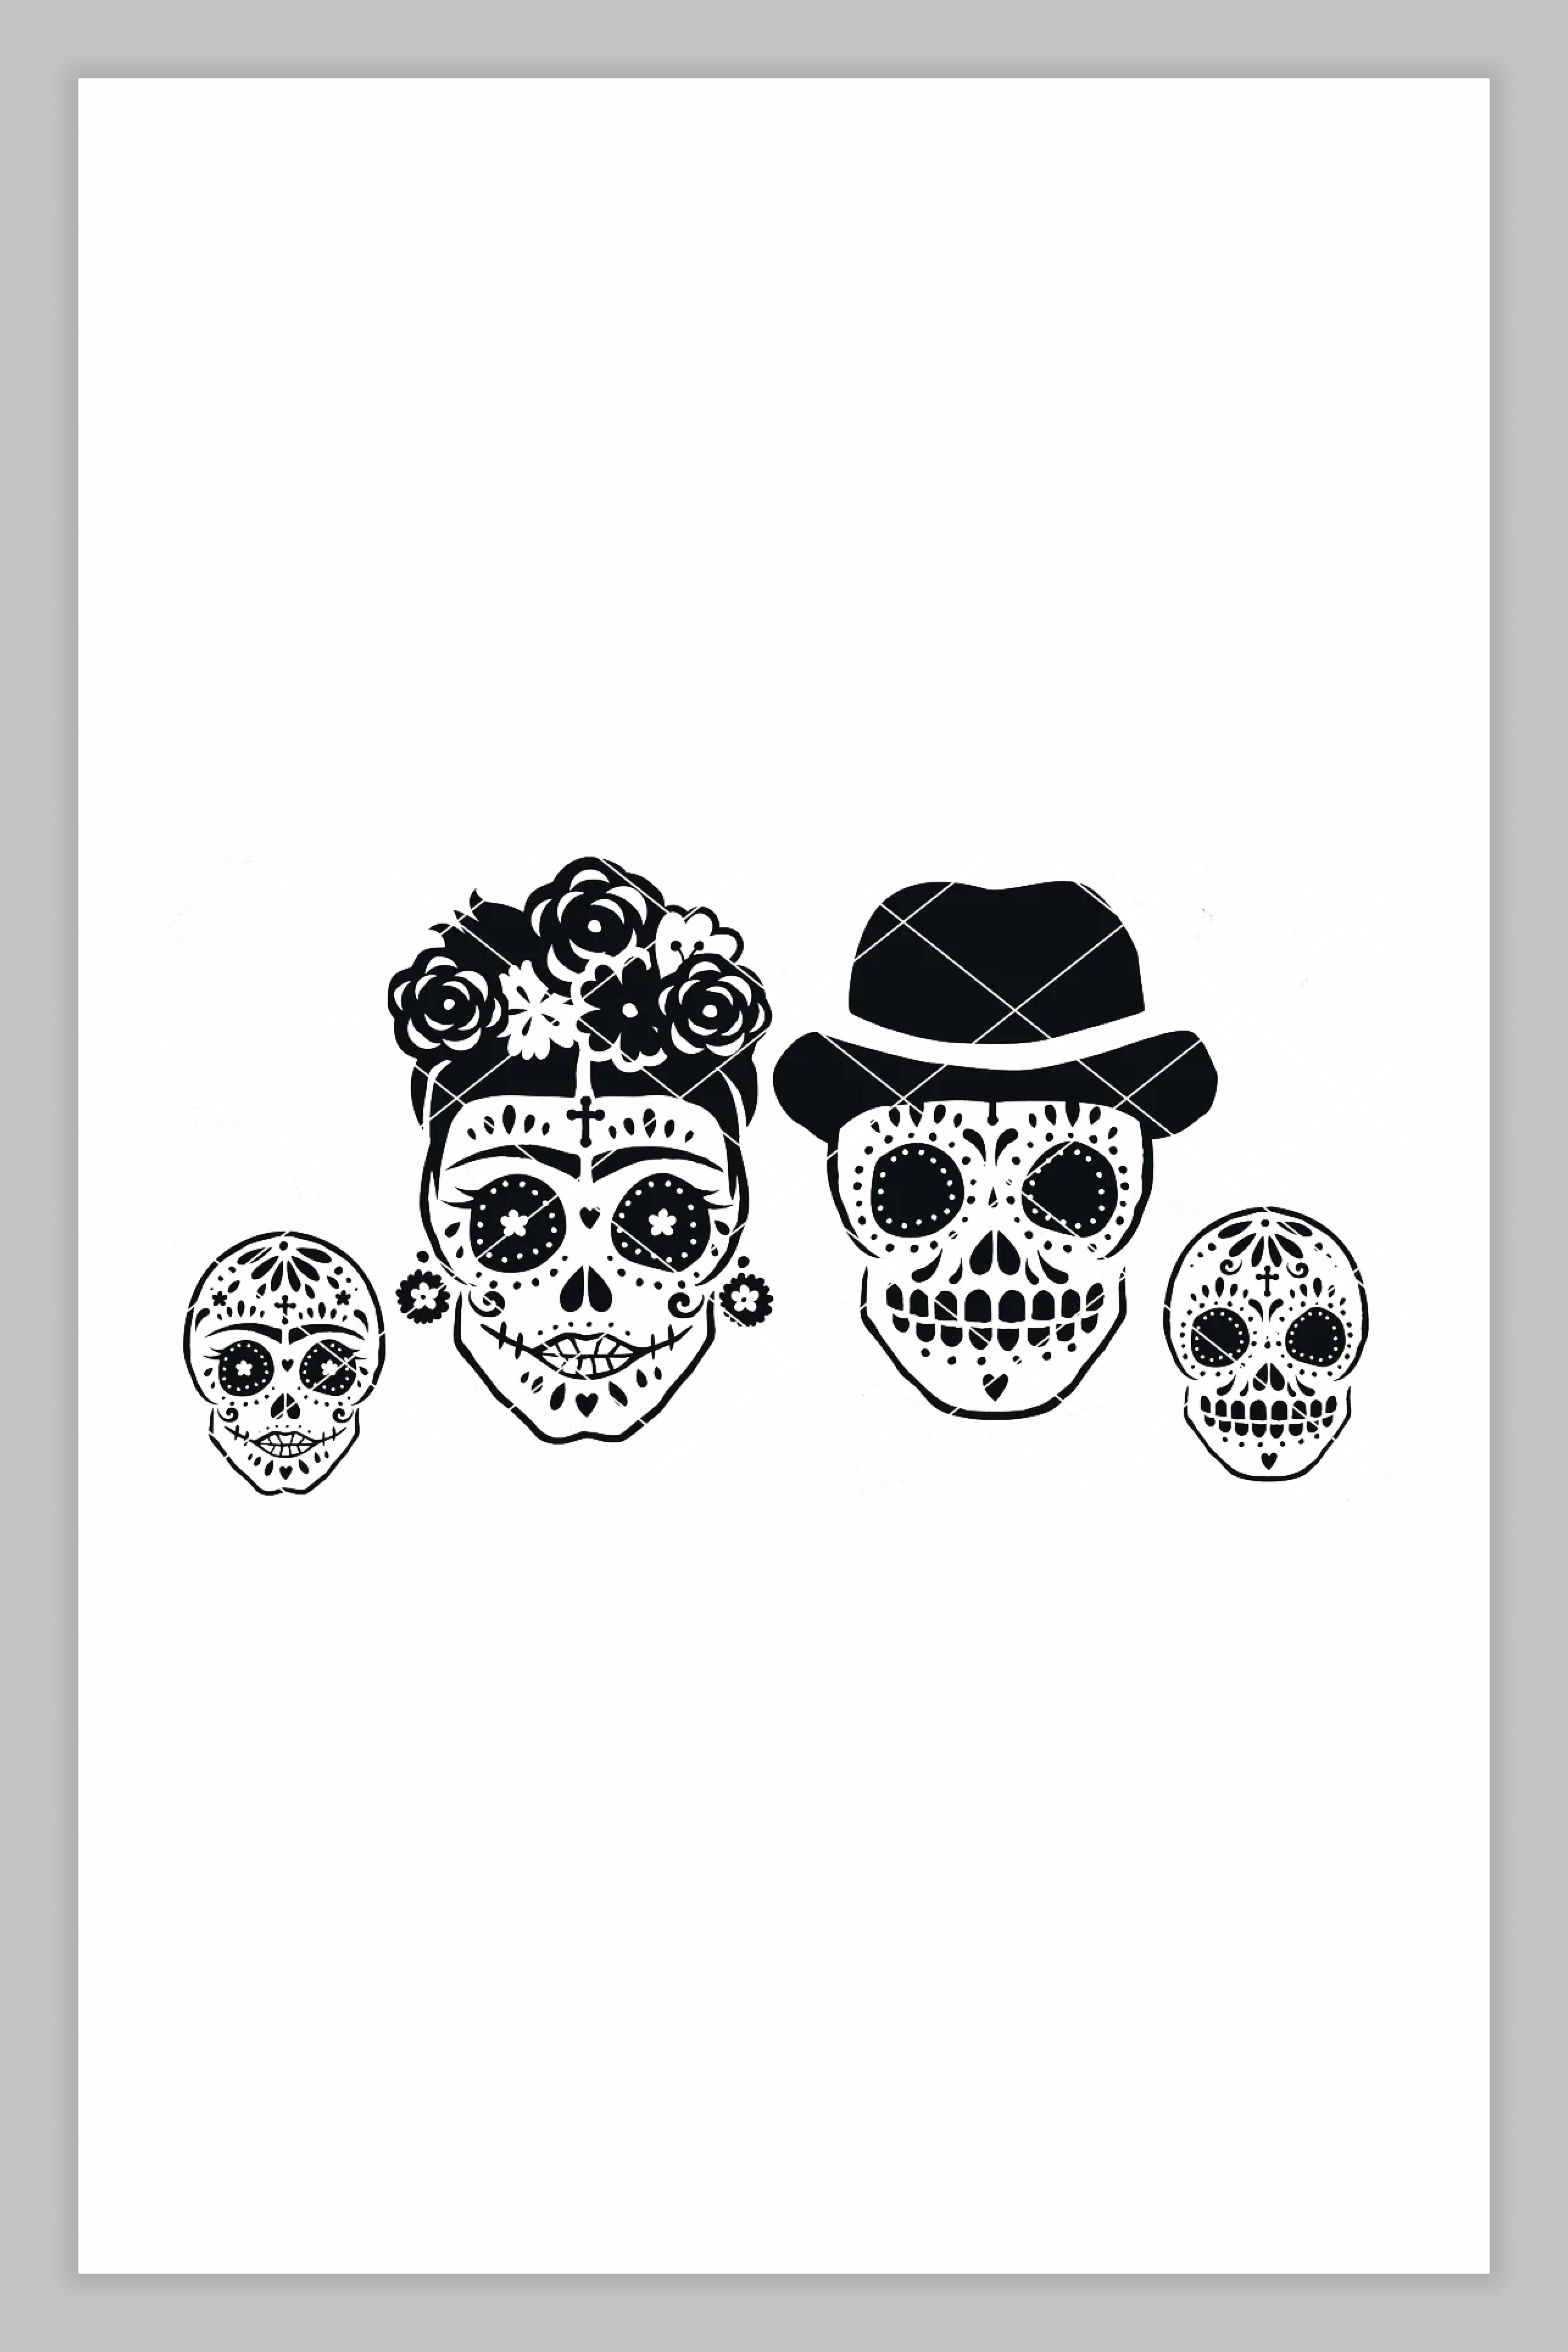 Mexican's Day of the Dead skull collage.